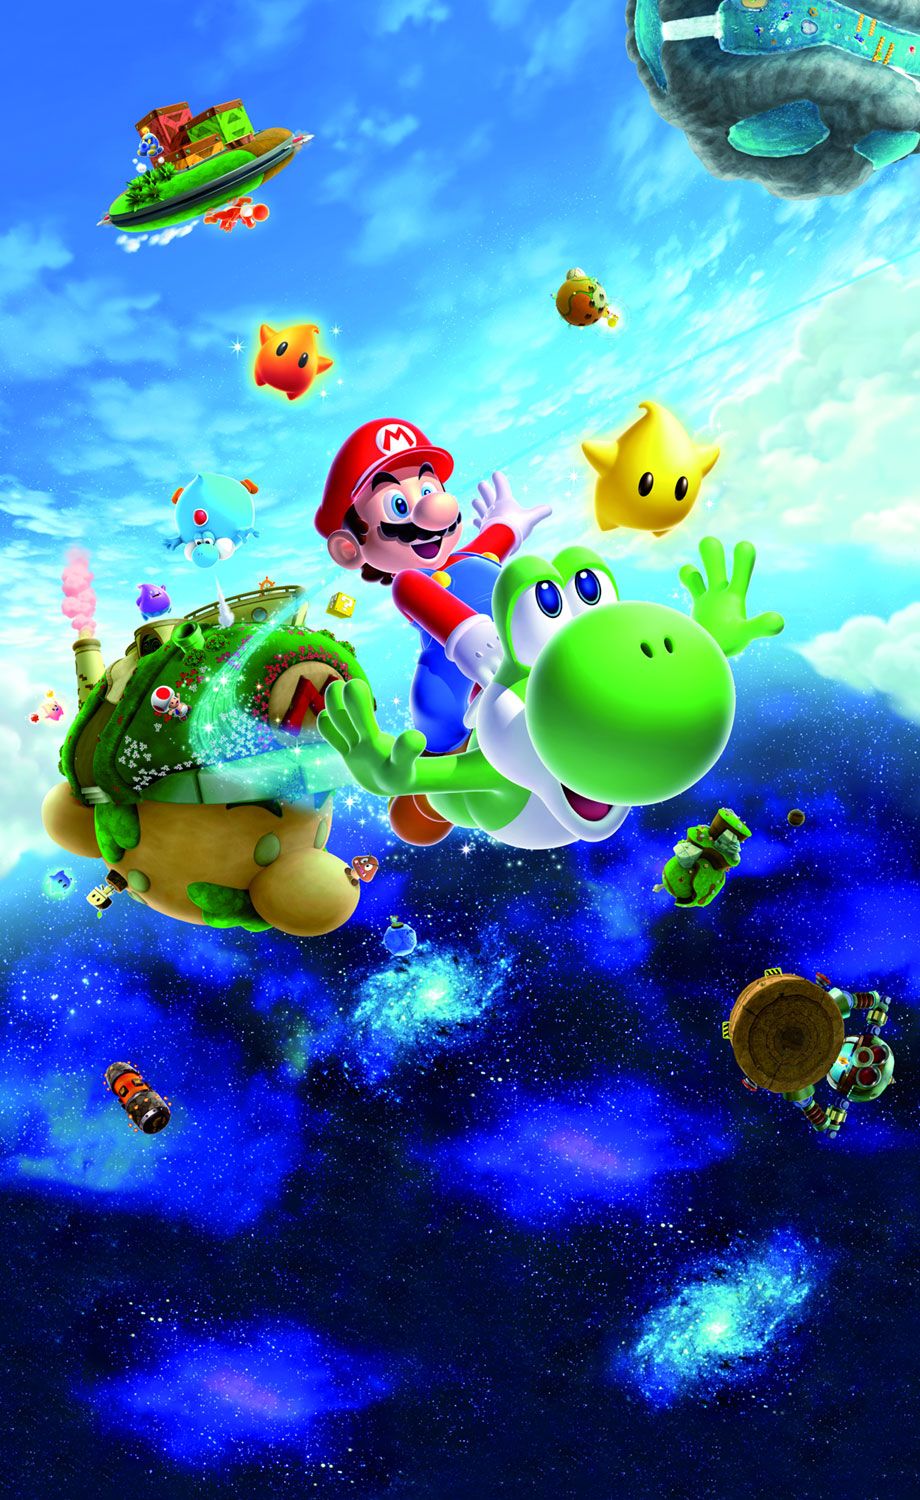 is super mario galaxy coming to switch